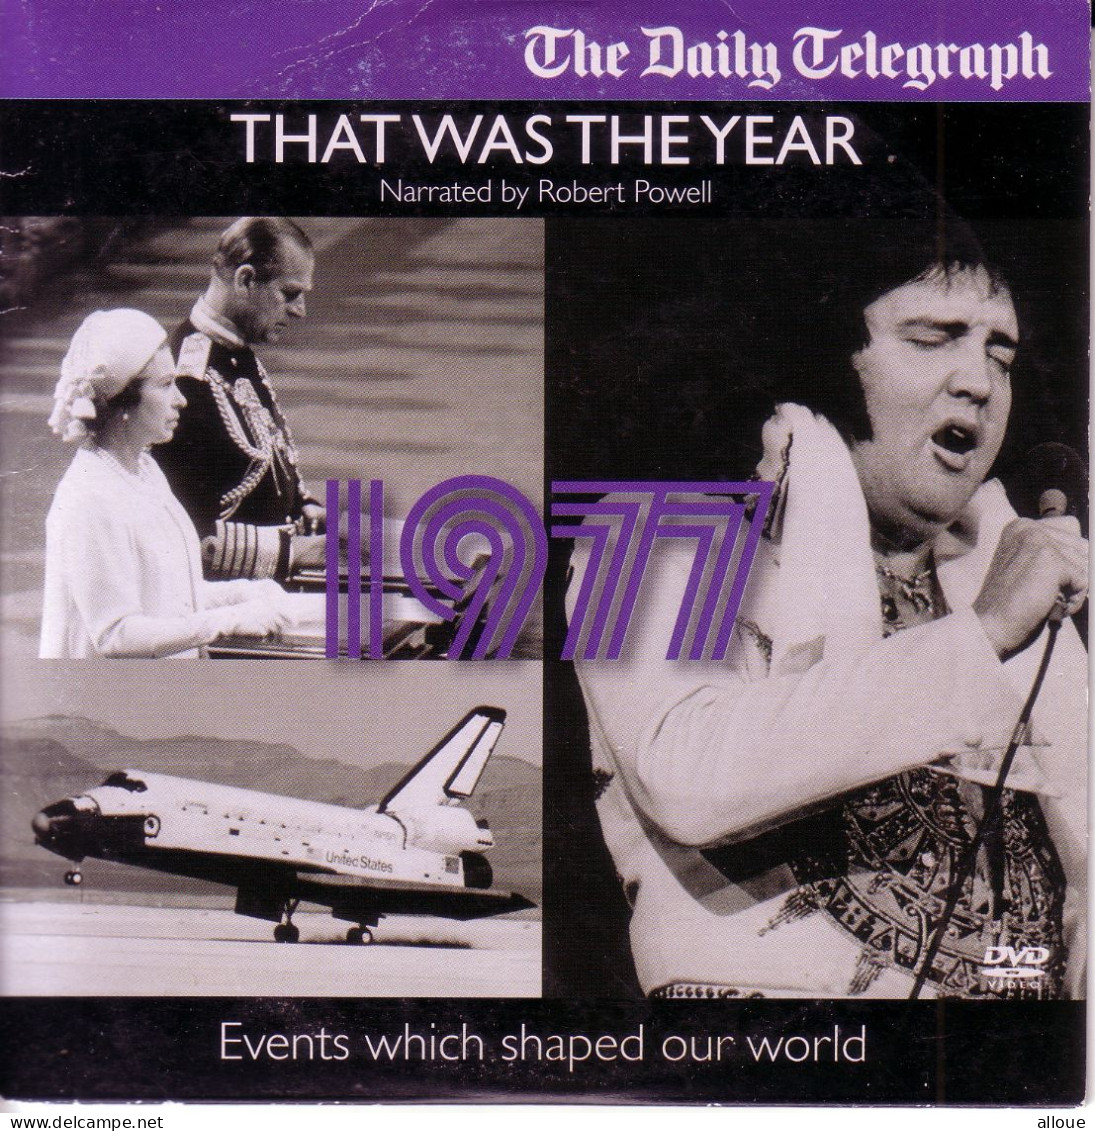 THAT WAS THE YEAR 1977 - CD DAILY TELEGRAPH - POCHETTE CARTON - THE QUEEN CELEBRATES HER SILVER JUBILEE - THE KING ELVIS - Muziek DVD's